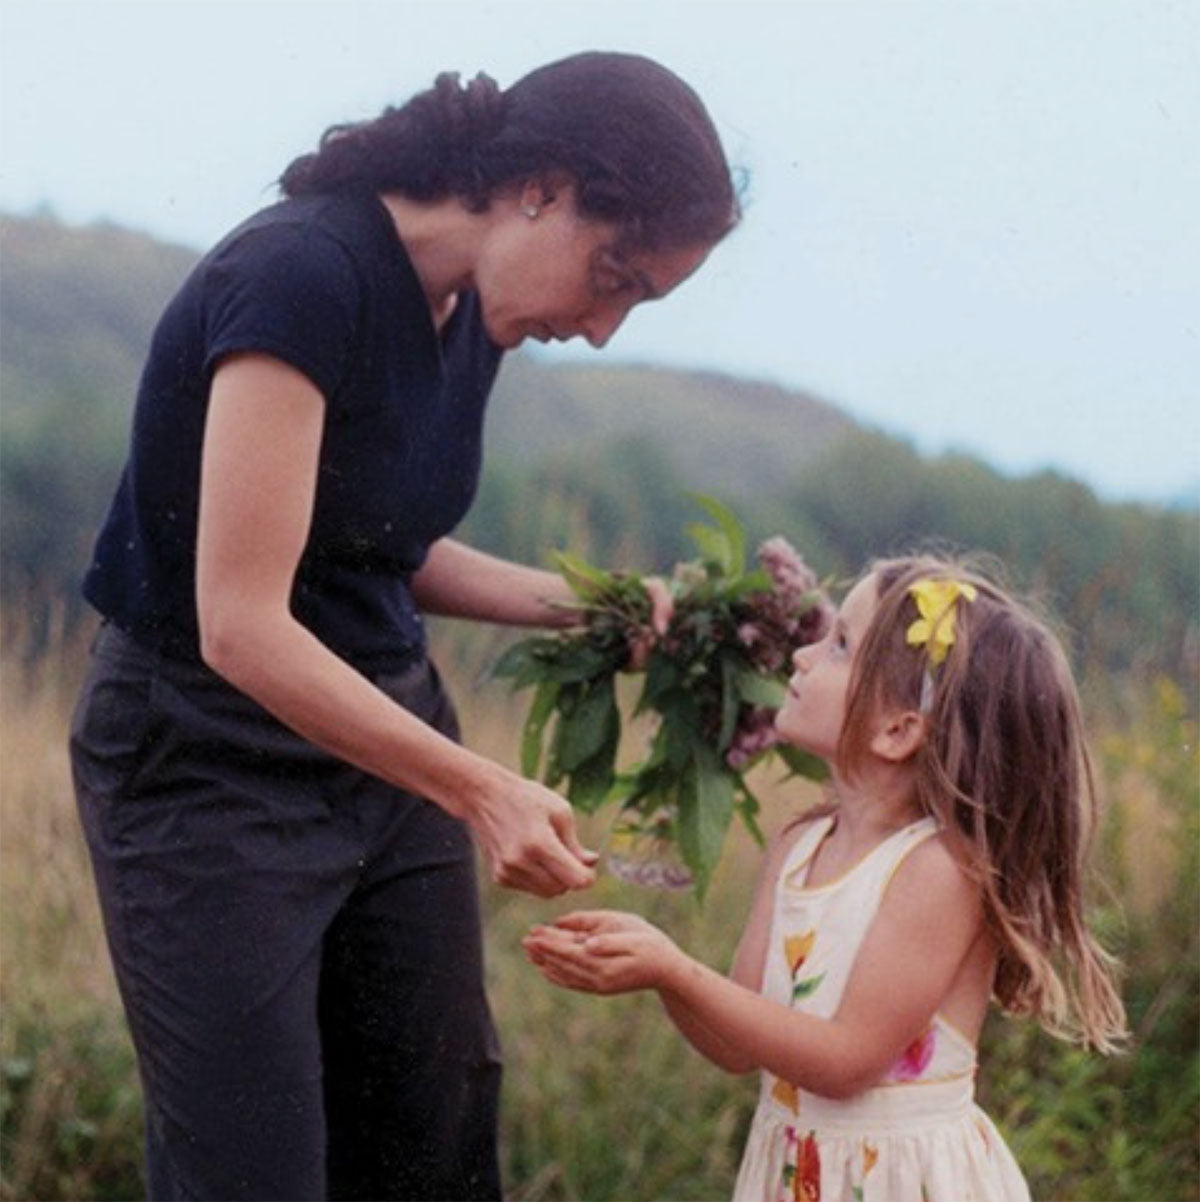 Mia and her daughter in a field